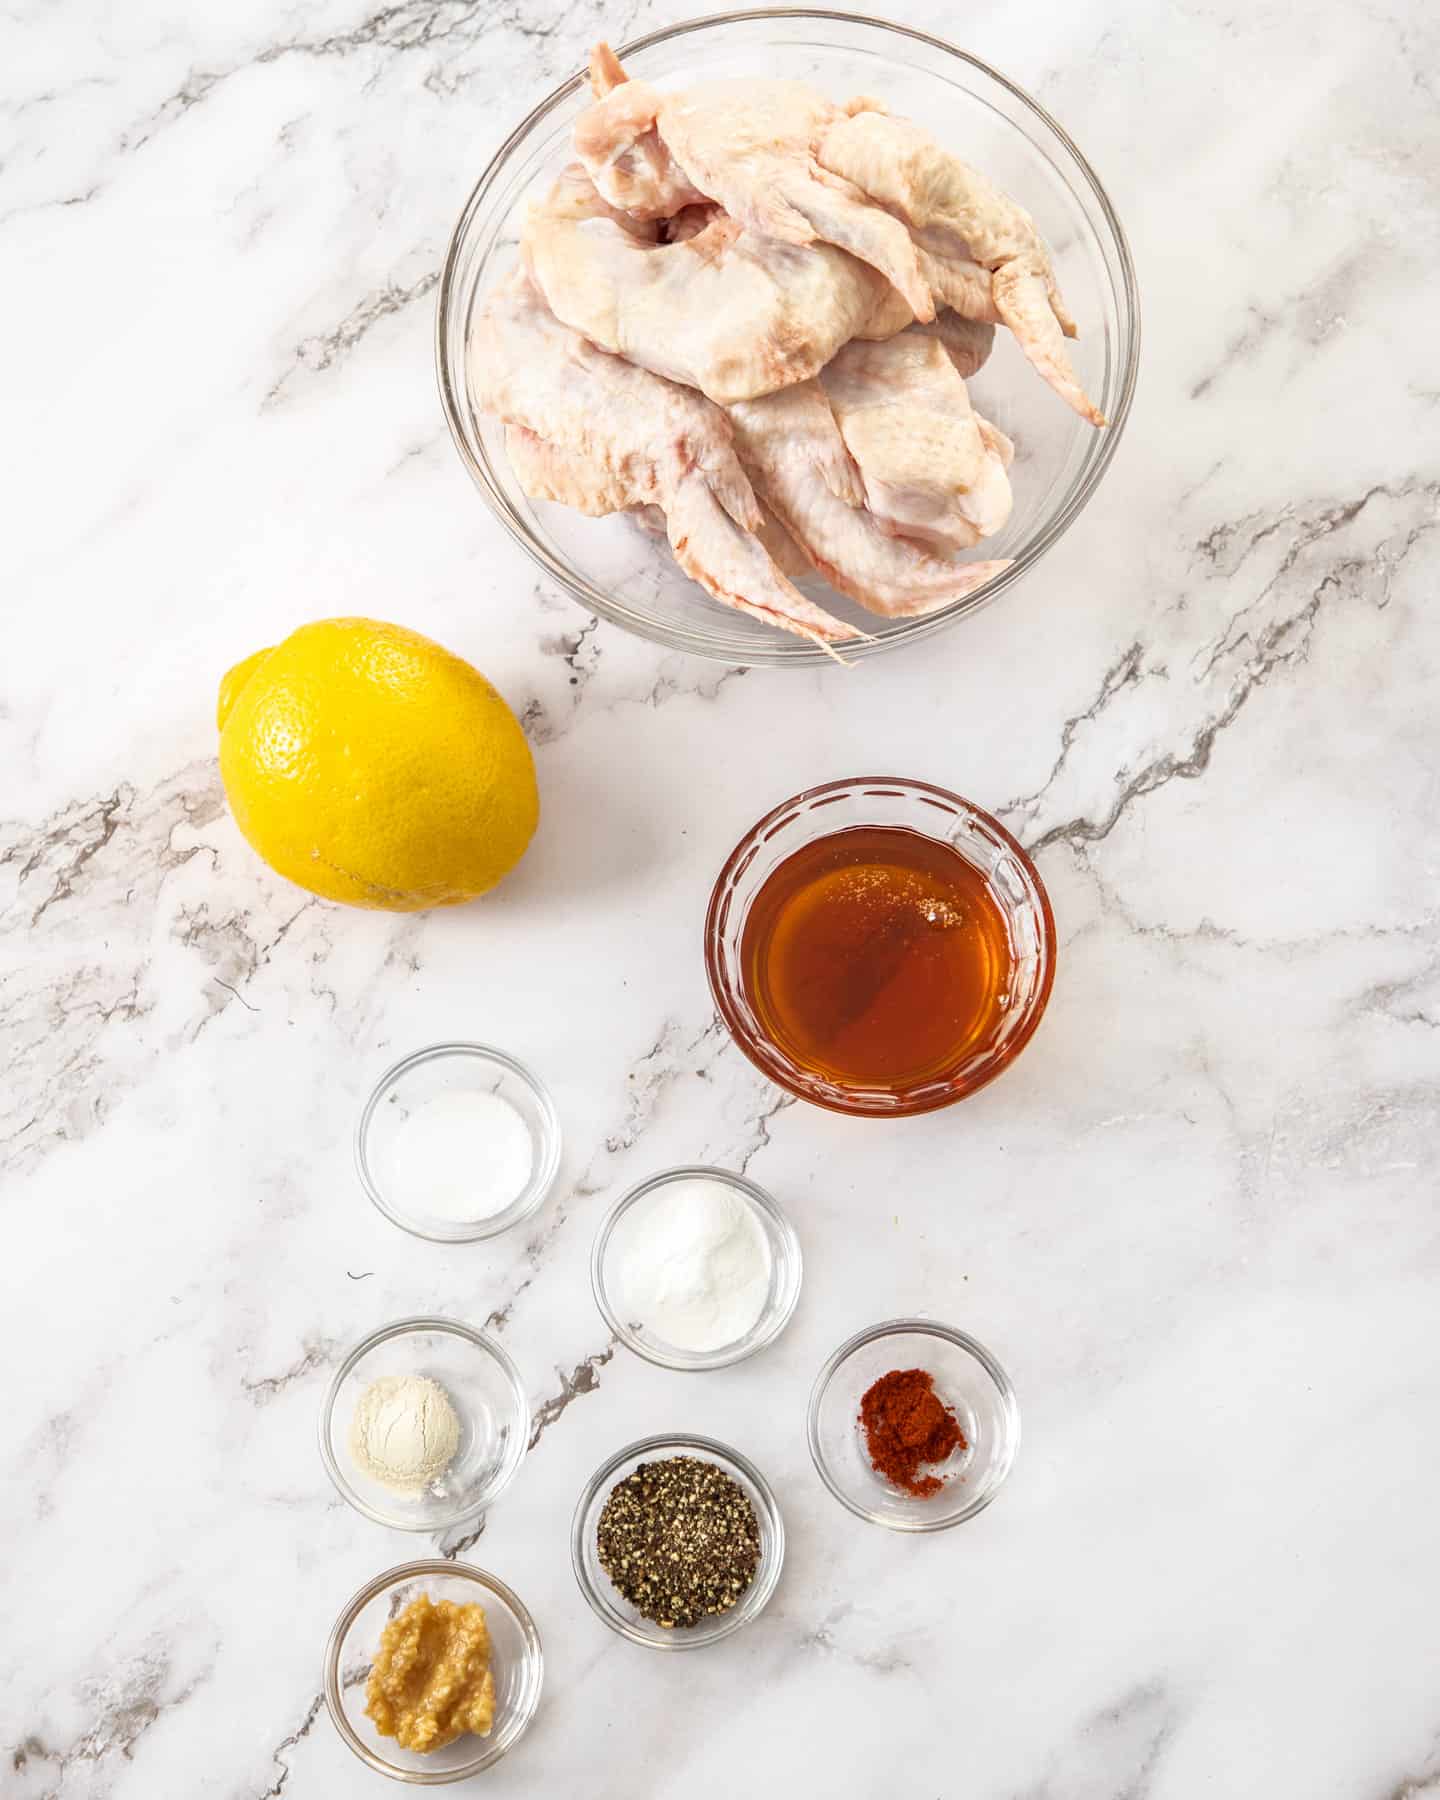 Ingredients for honey lemon pepper chicken wings on a marble benchtop.